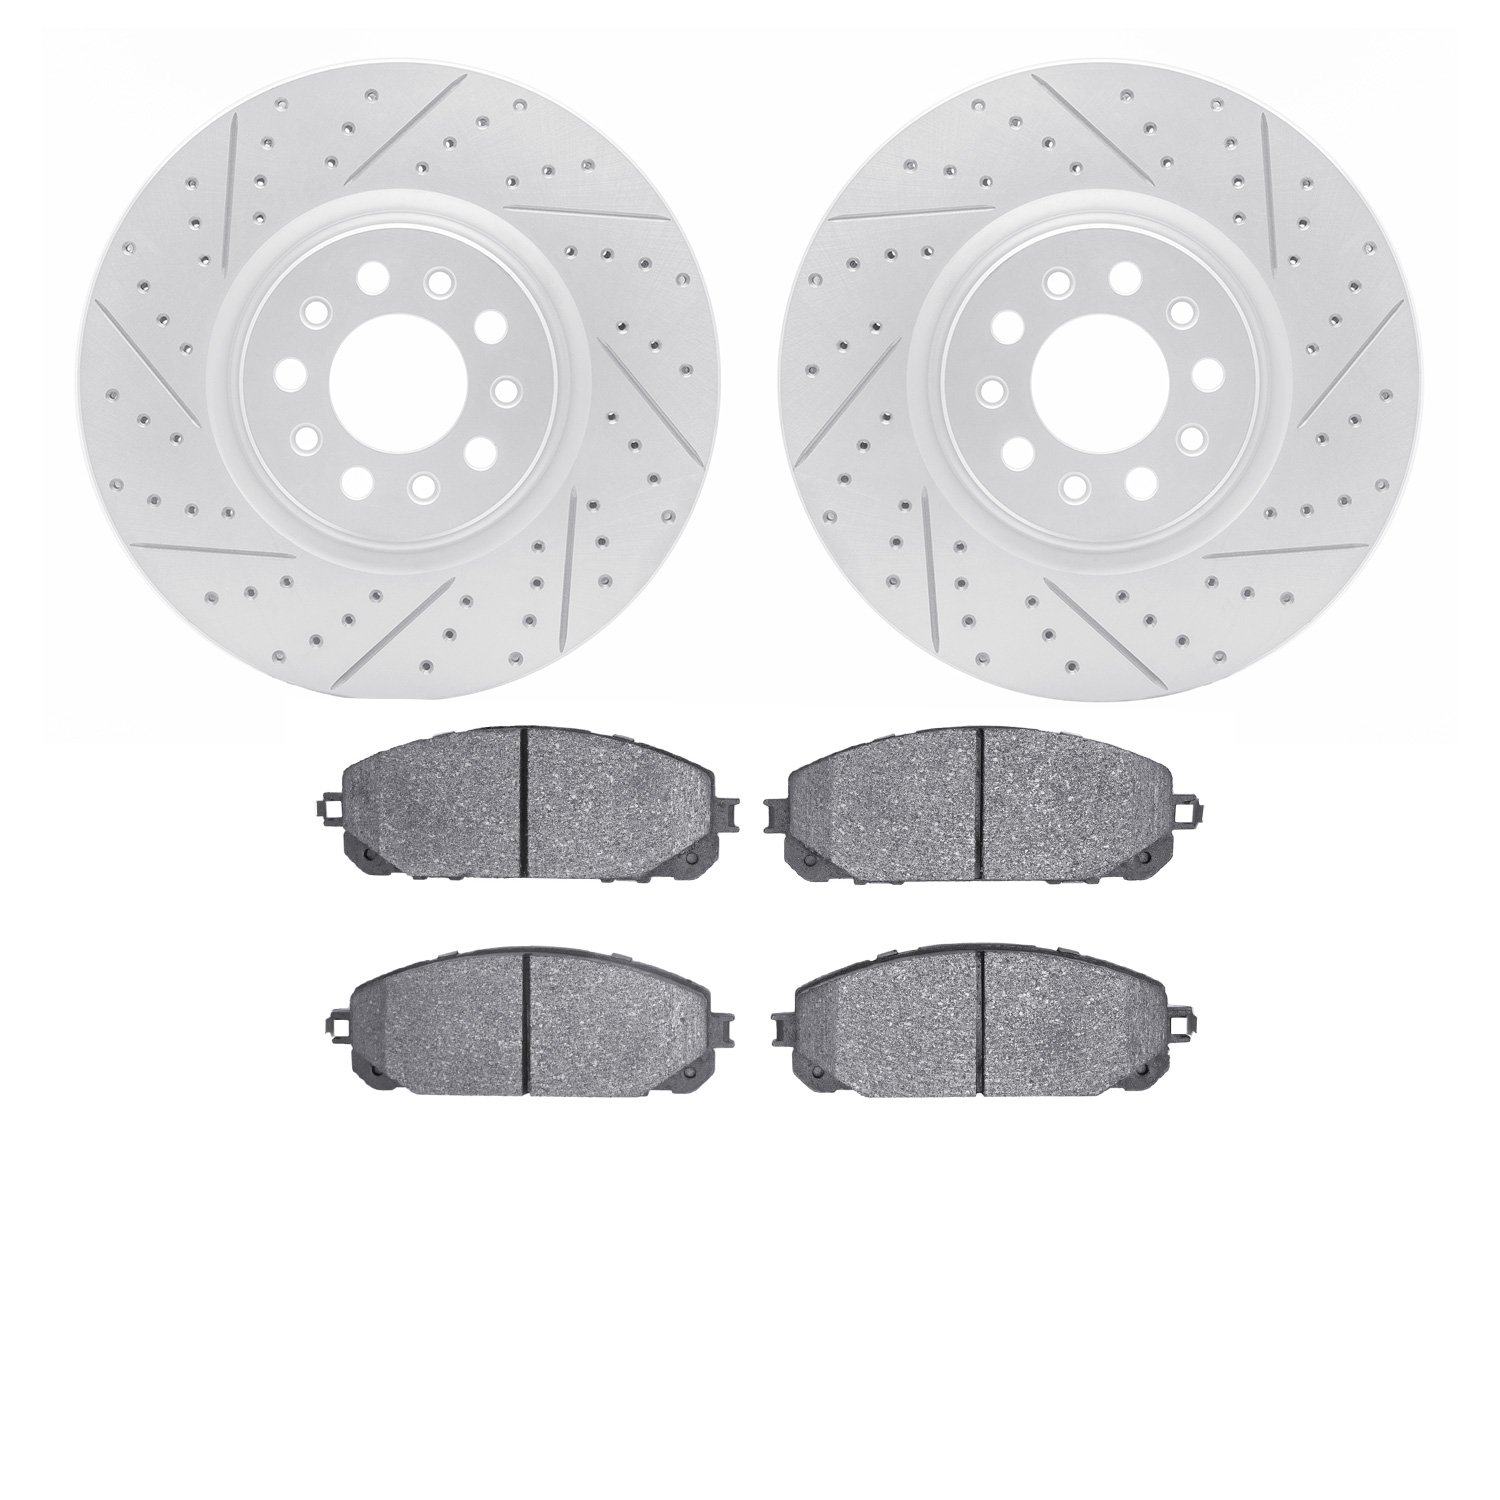 2402-42015 Geoperformance Drilled/Slotted Brake Rotors with Ultimate-Duty Brake Pads Kit, Fits Select Mopar, Position: Front